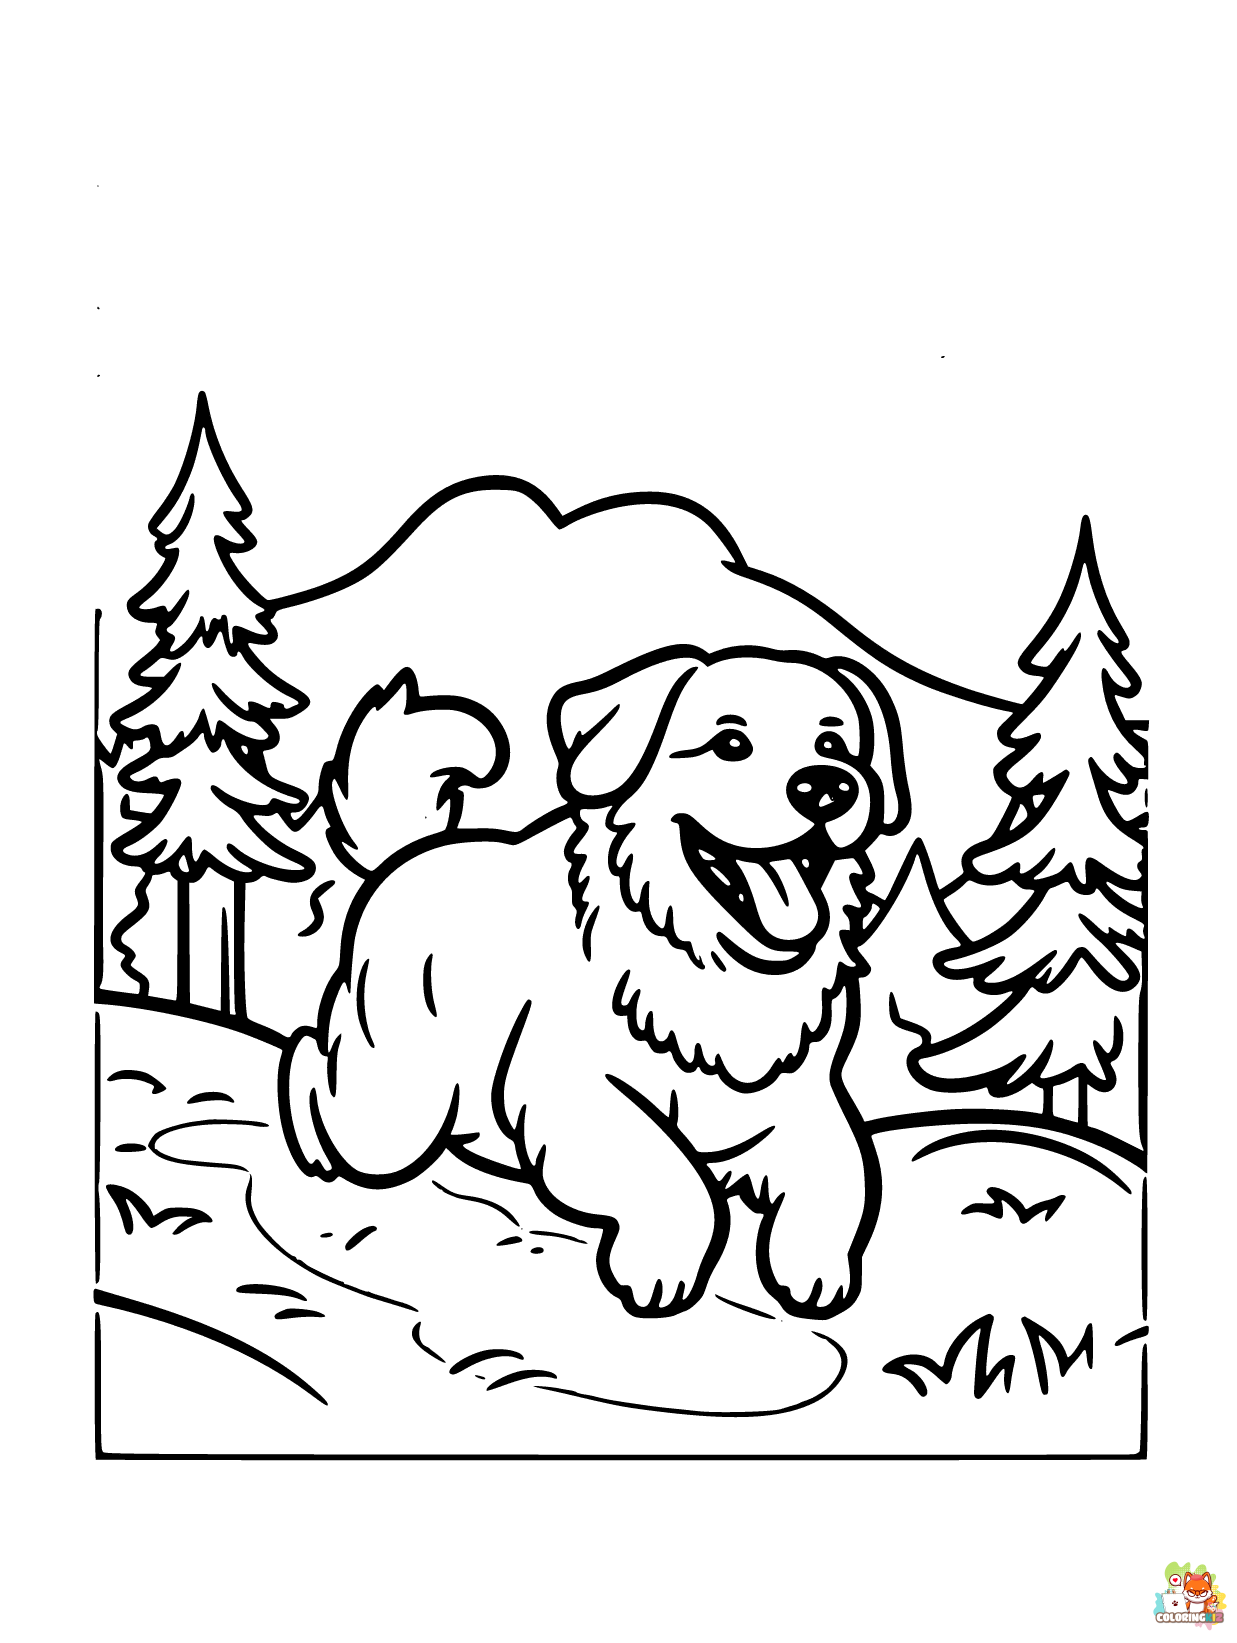 N1 Midjourney Dog Coloring pages for kids A dog running through 8fd77b2b faa9 4efb 9821 5e3aa162fb2f edge